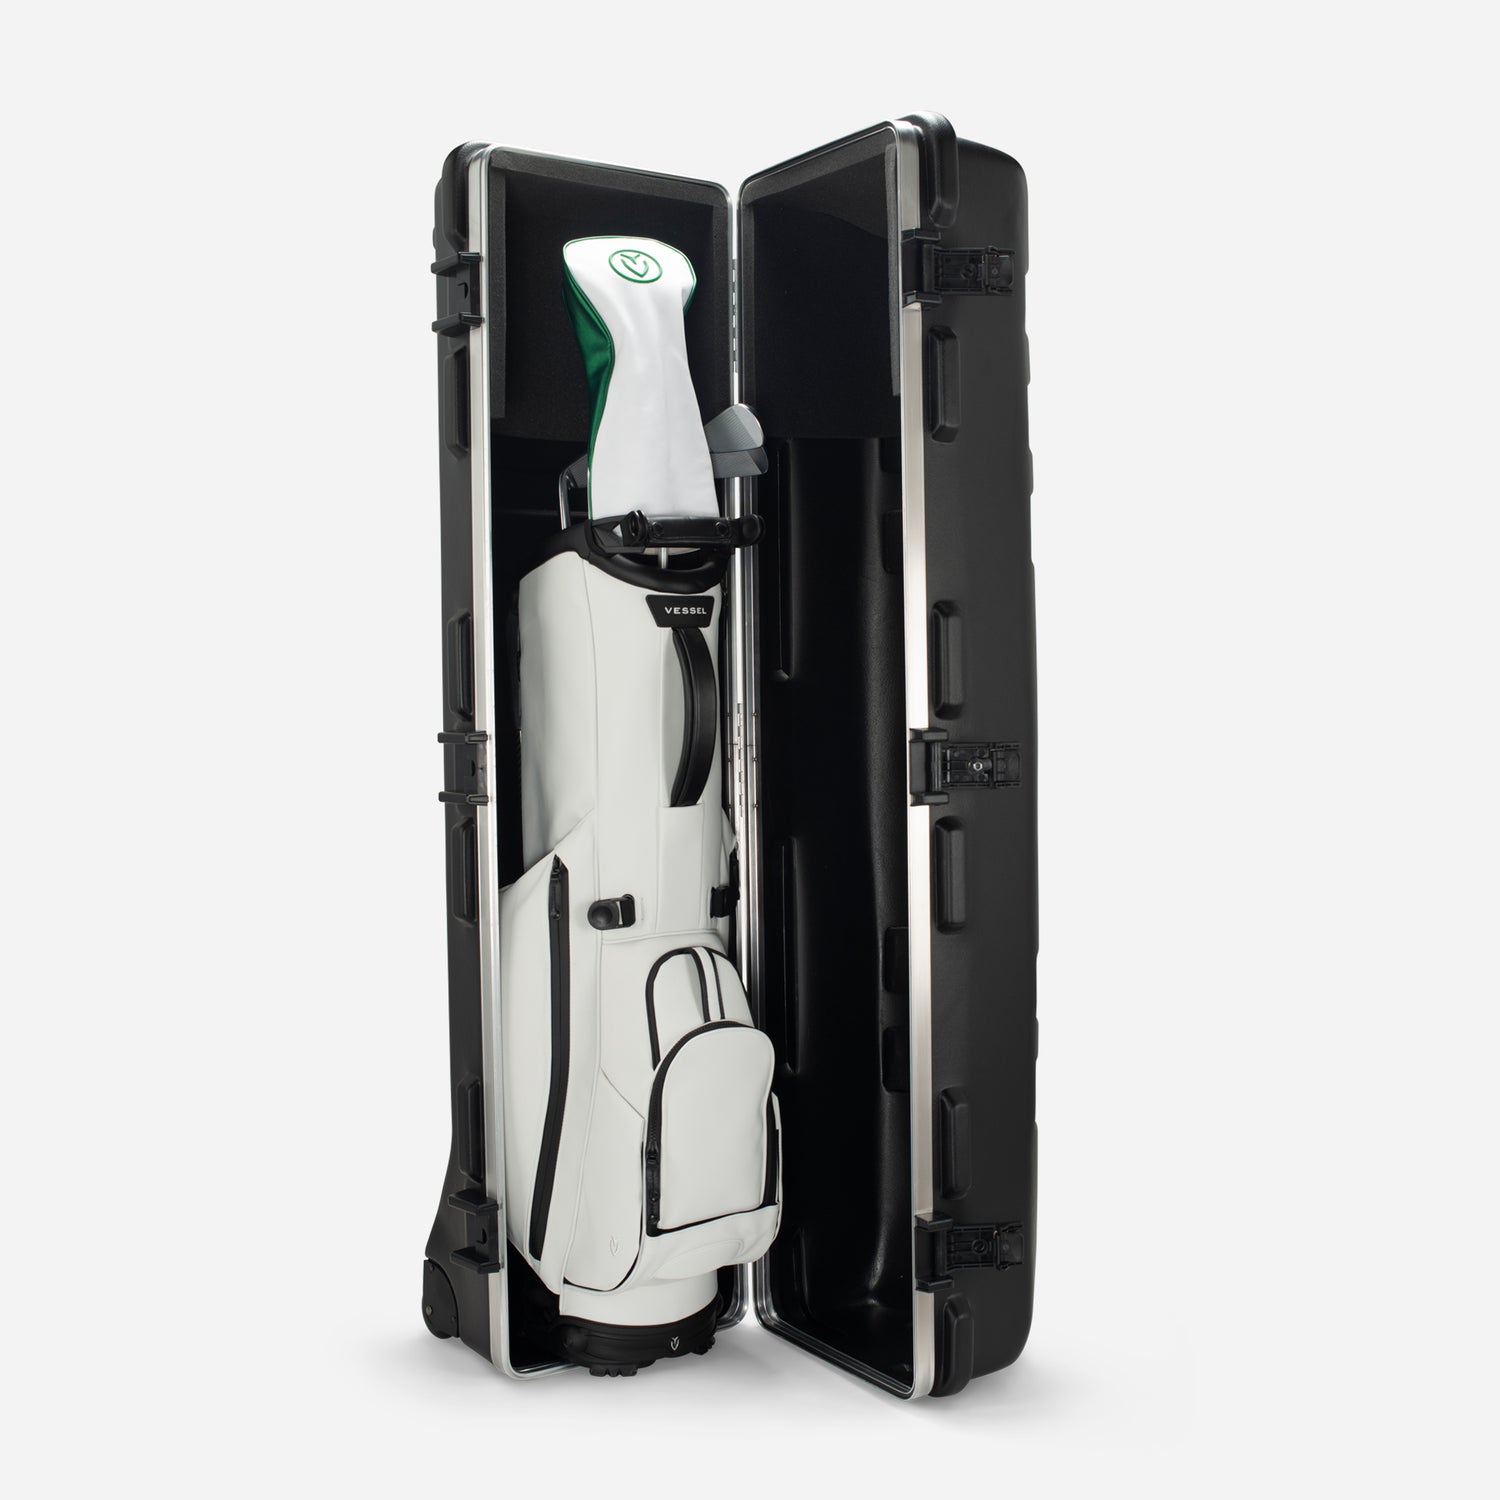 Tips for Traveling with Golf Gear: How to Choose the Best Golf Travel Bags and Travel Covers